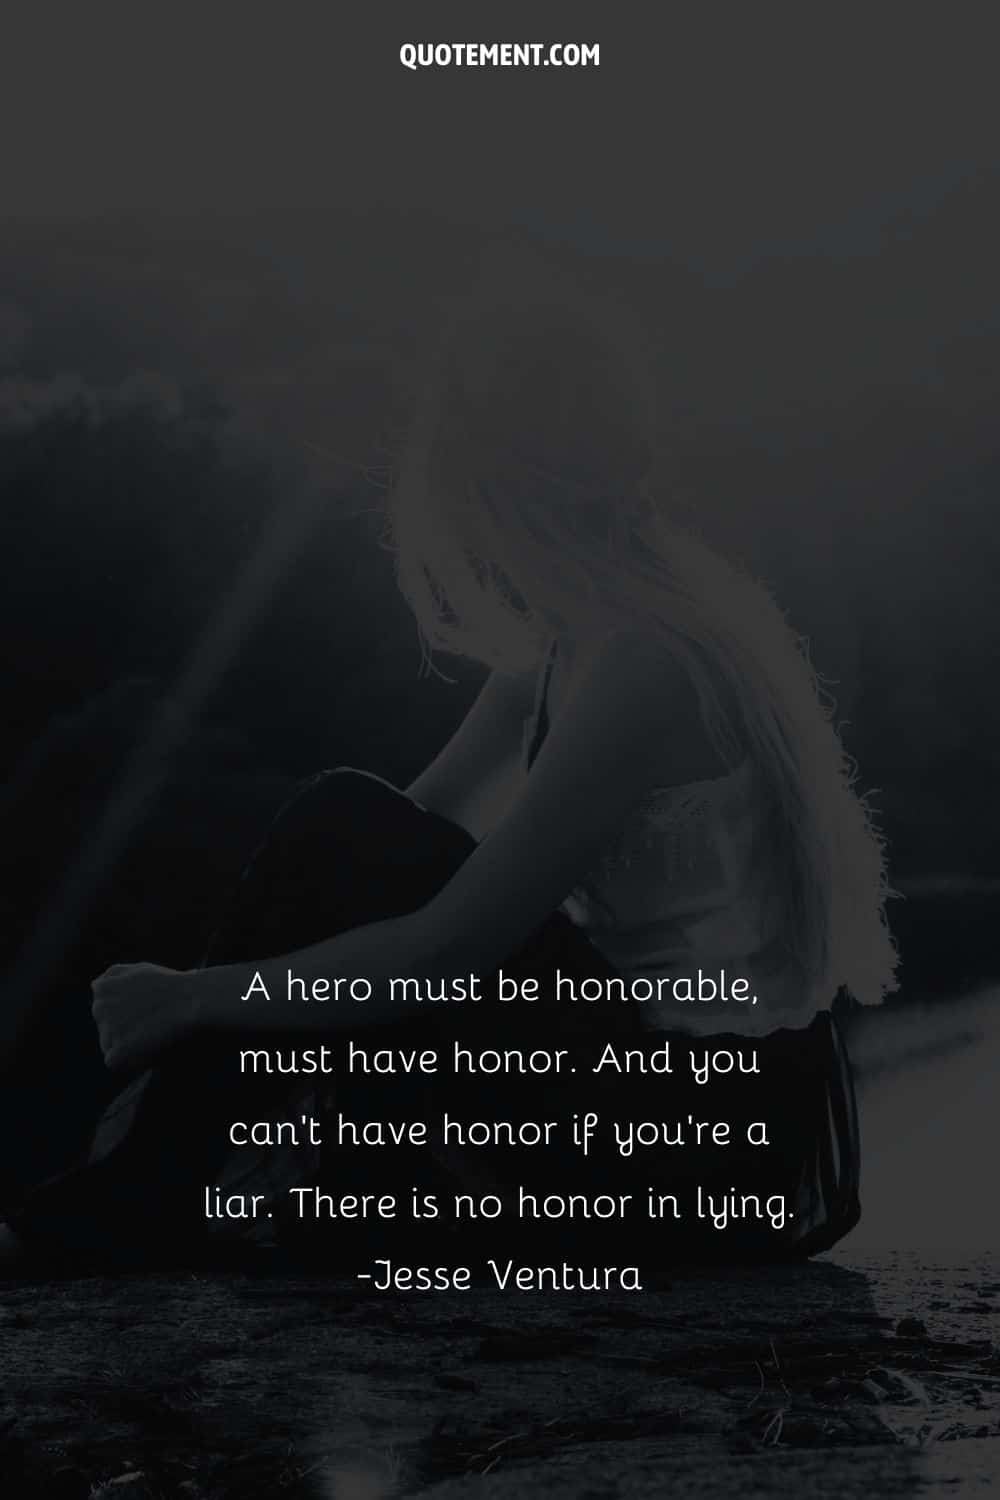 A hero must be honorable, must have honor. And you can’t have honor if you’re a liar. There is no honor in lying